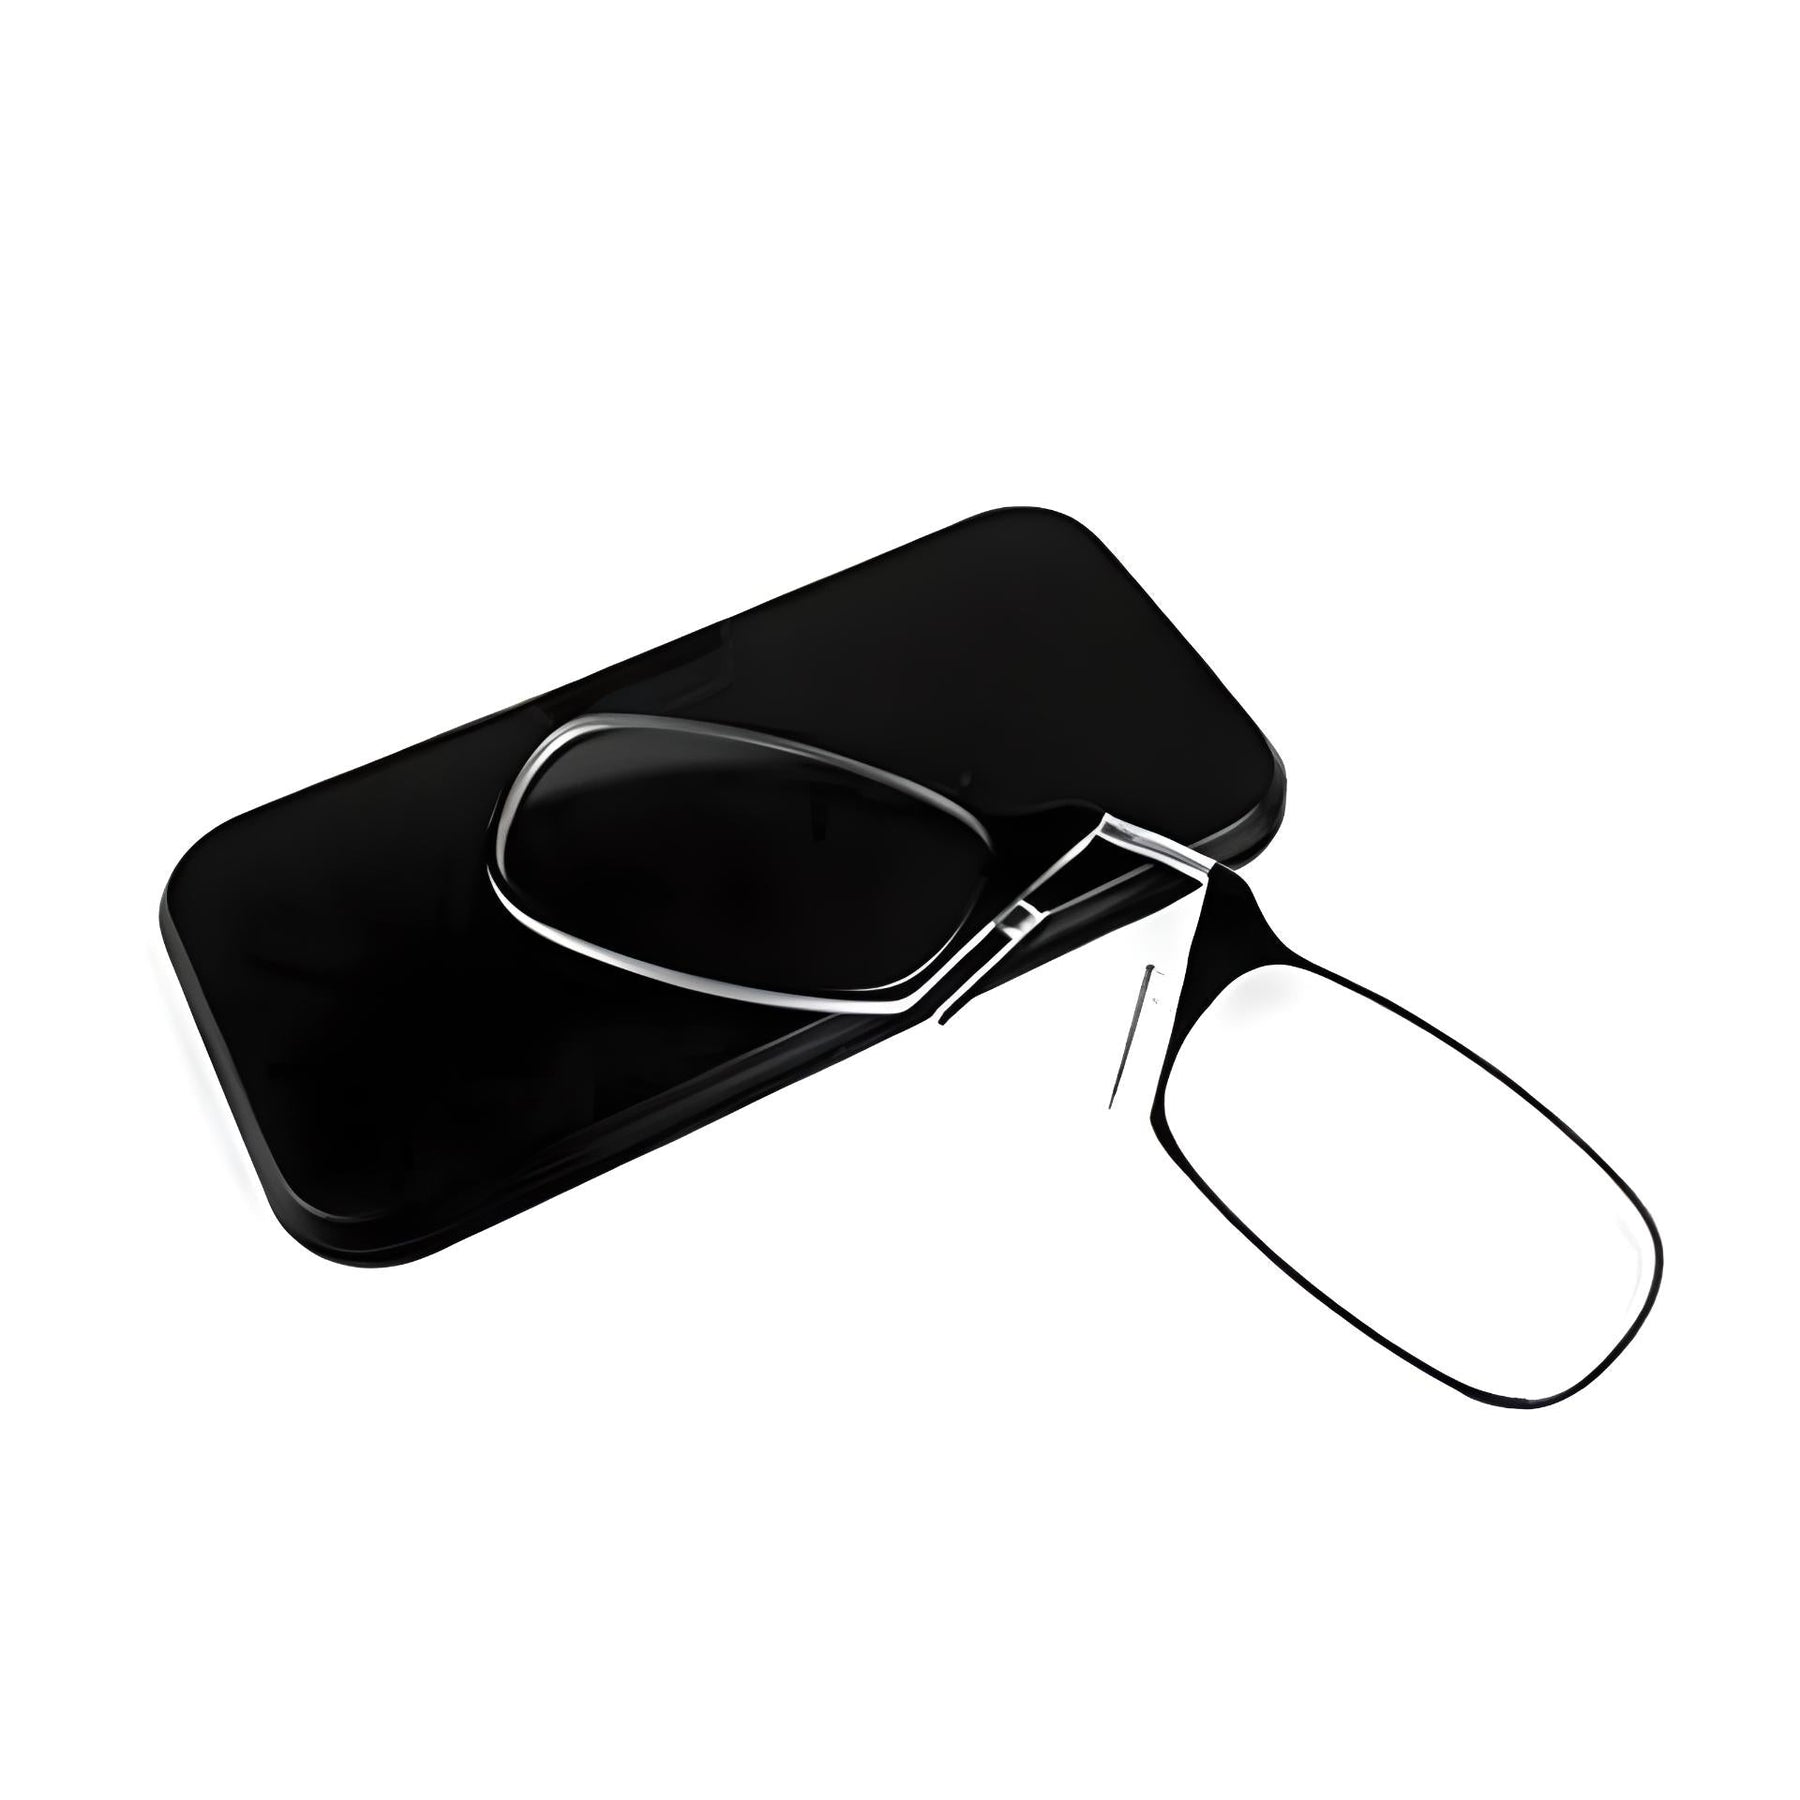 Legless Clamp Nose Reading Glasses: Elevated, Portable, Retractable, Ultra-thin, and Unisex - Gear Elevation